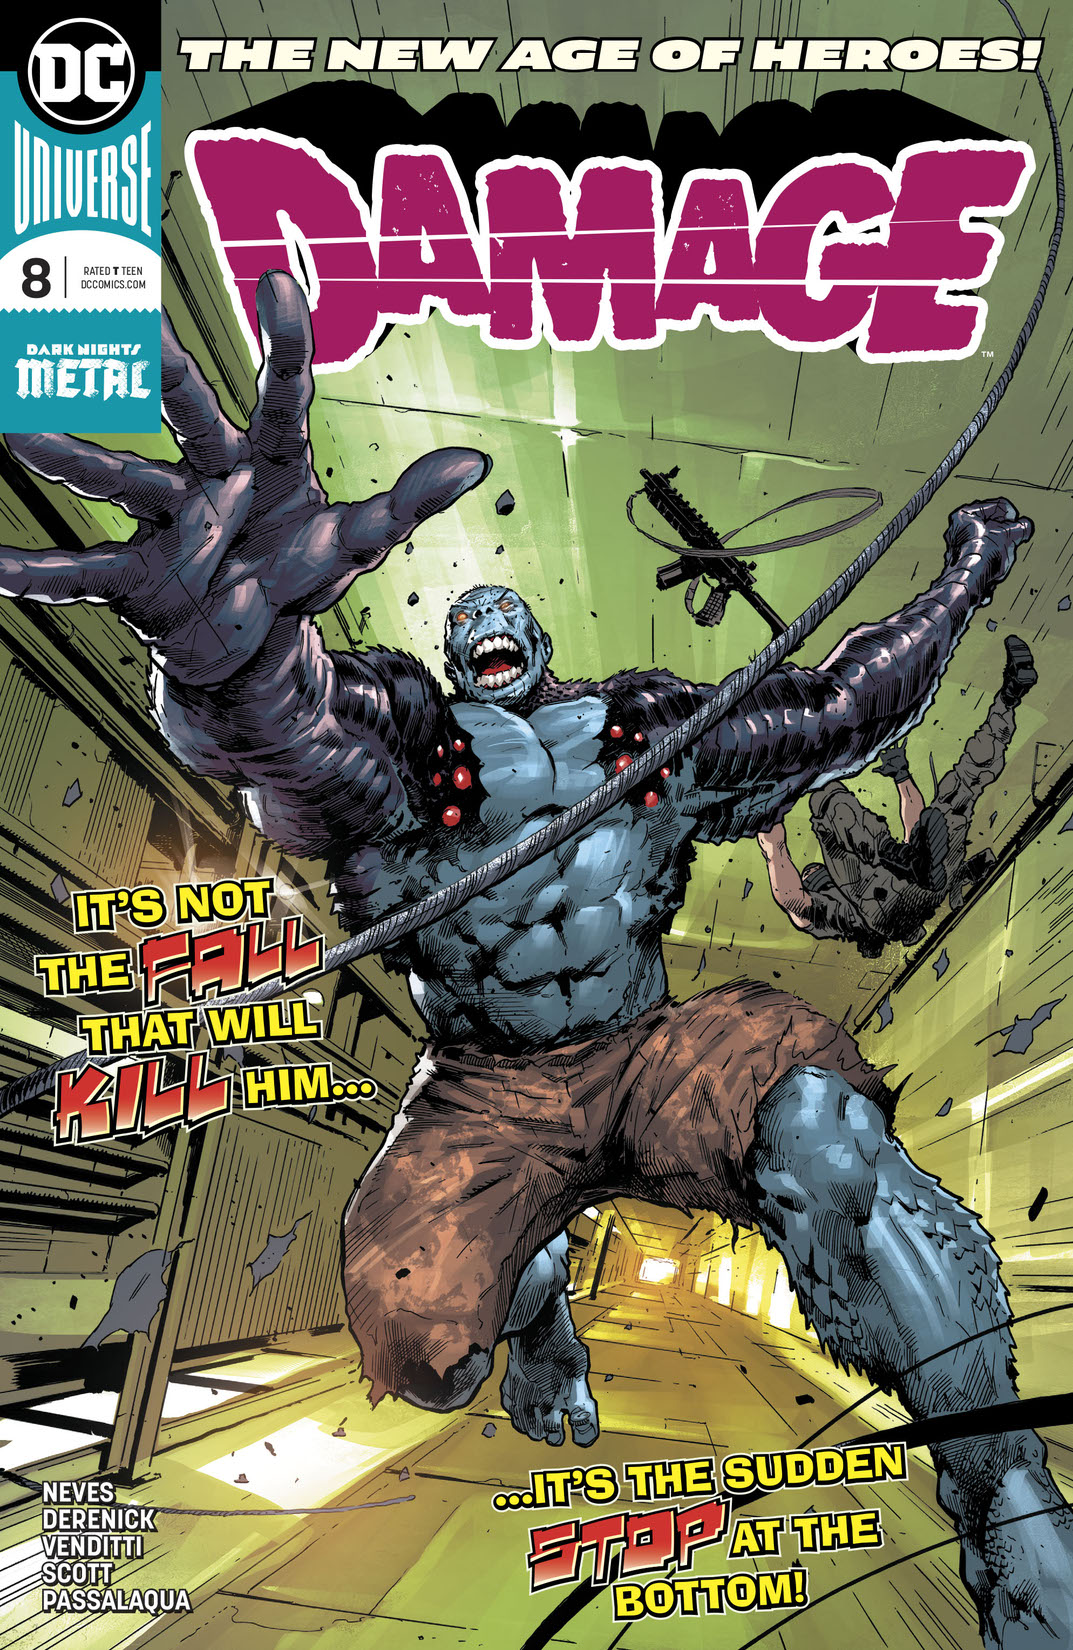 Damage (2018-) #8 preview images